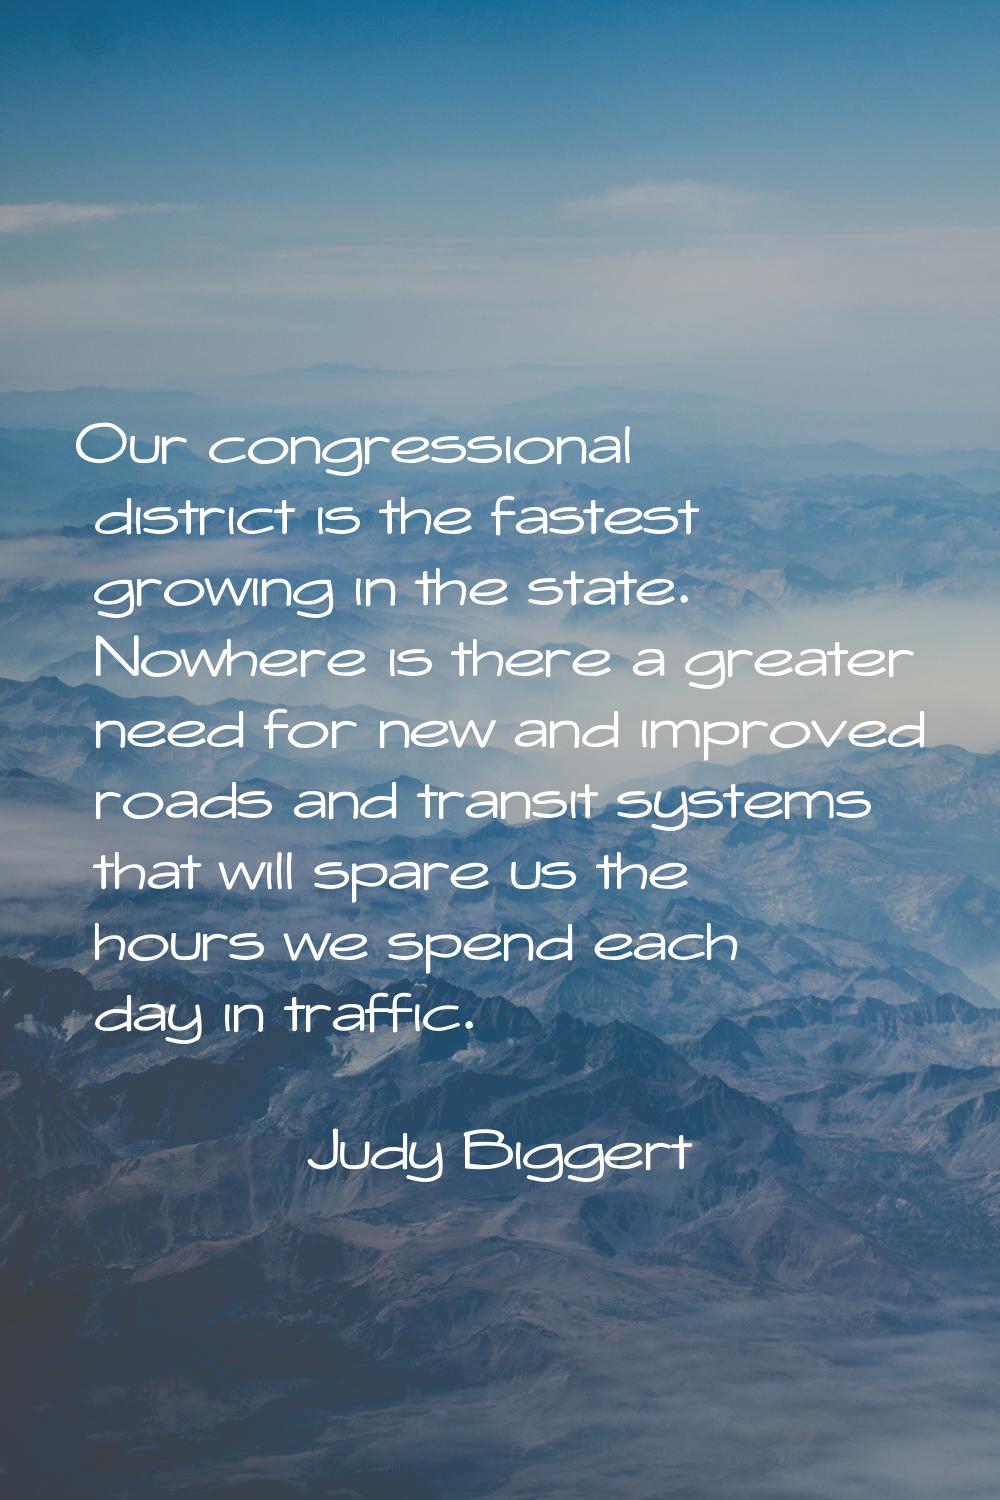 Our congressional district is the fastest growing in the state. Nowhere is there a greater need for